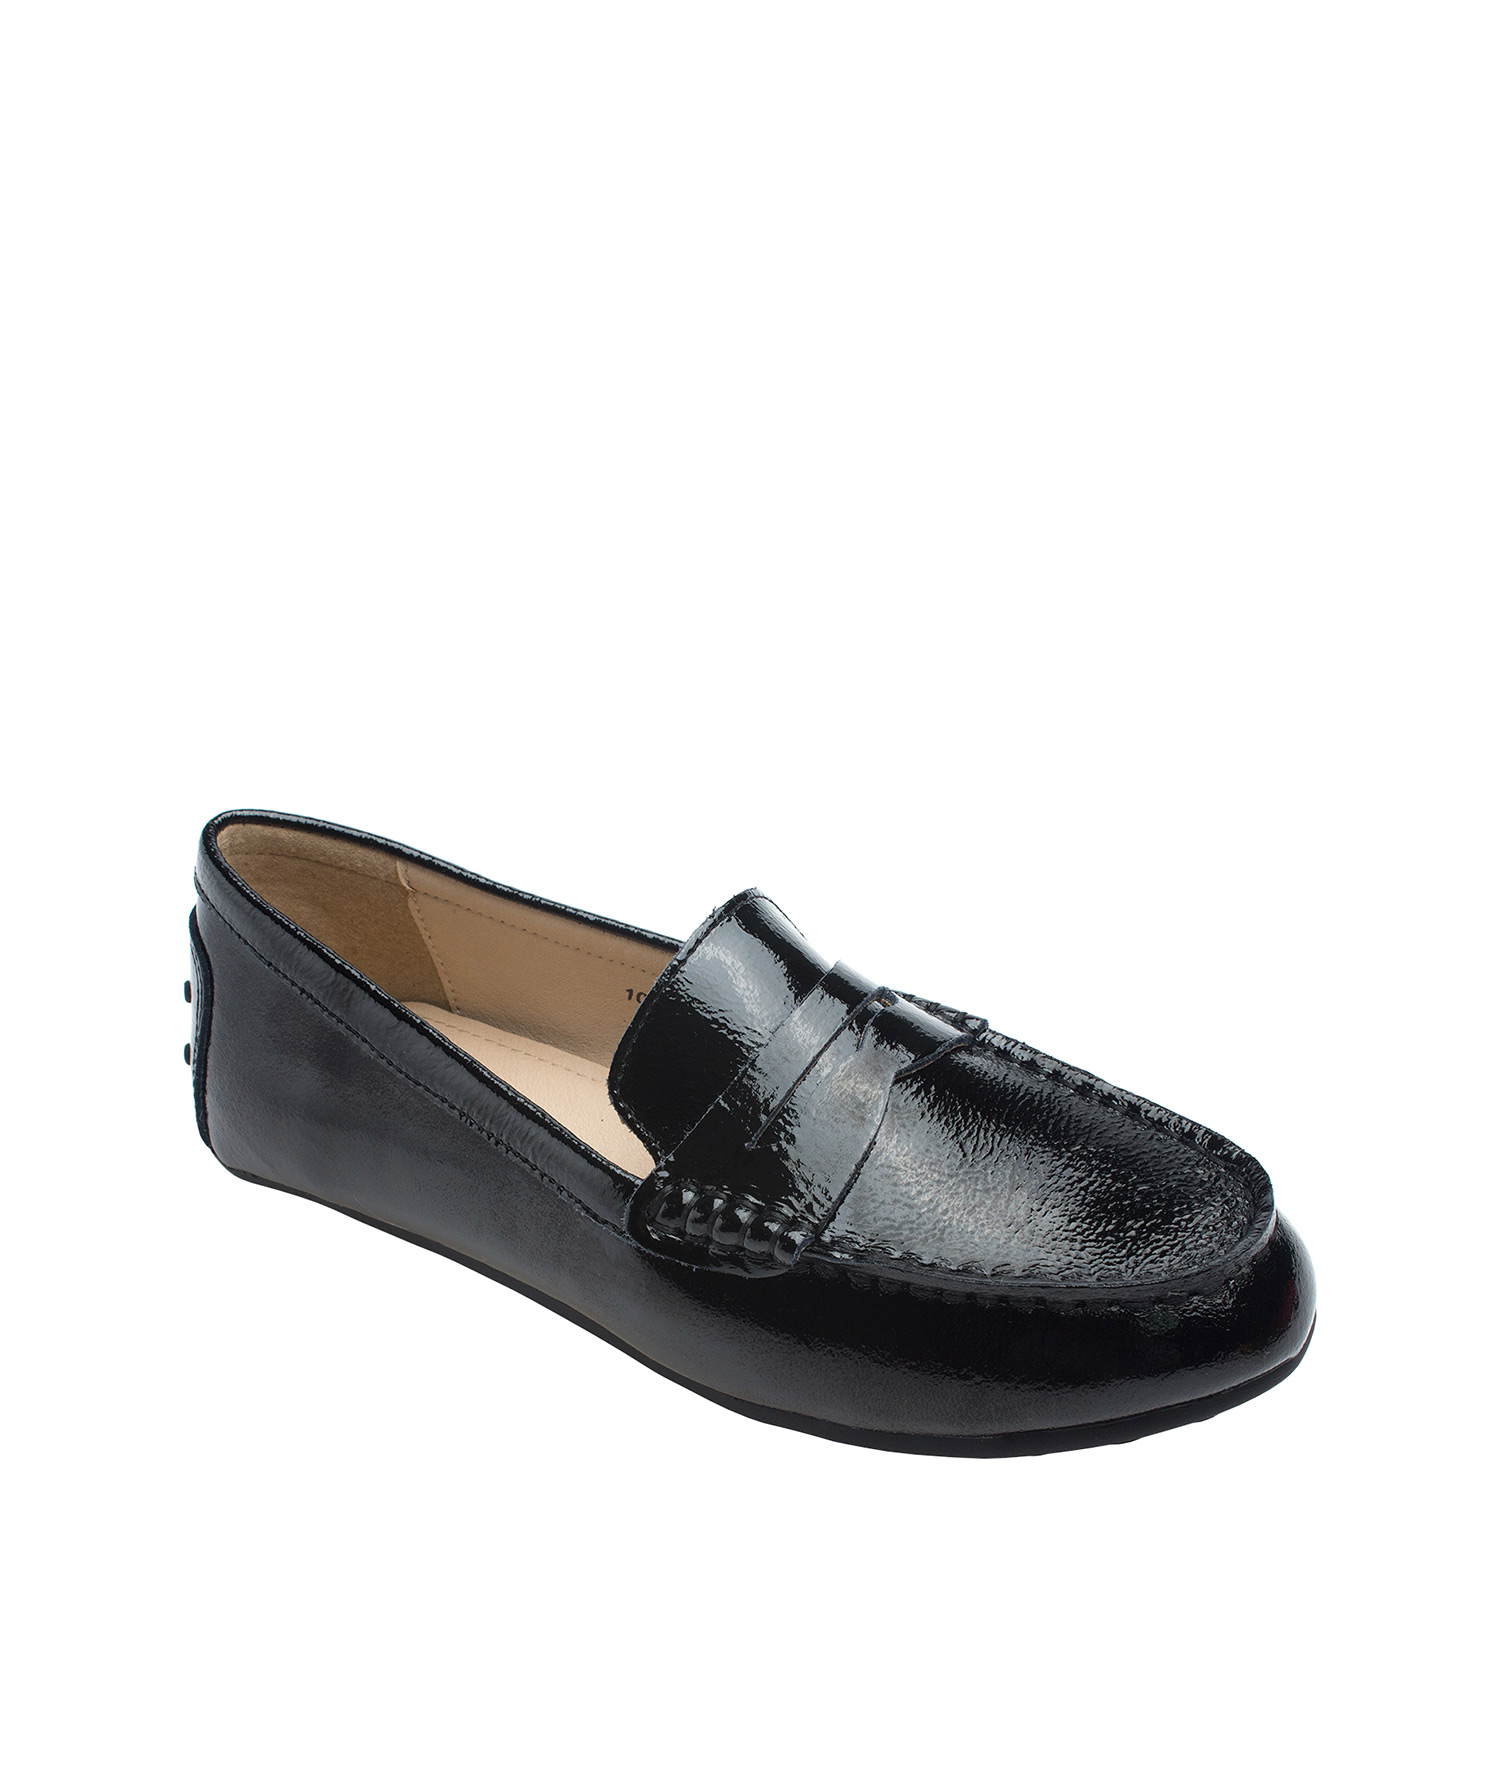 Patent Leather Penny Loafer Driving 